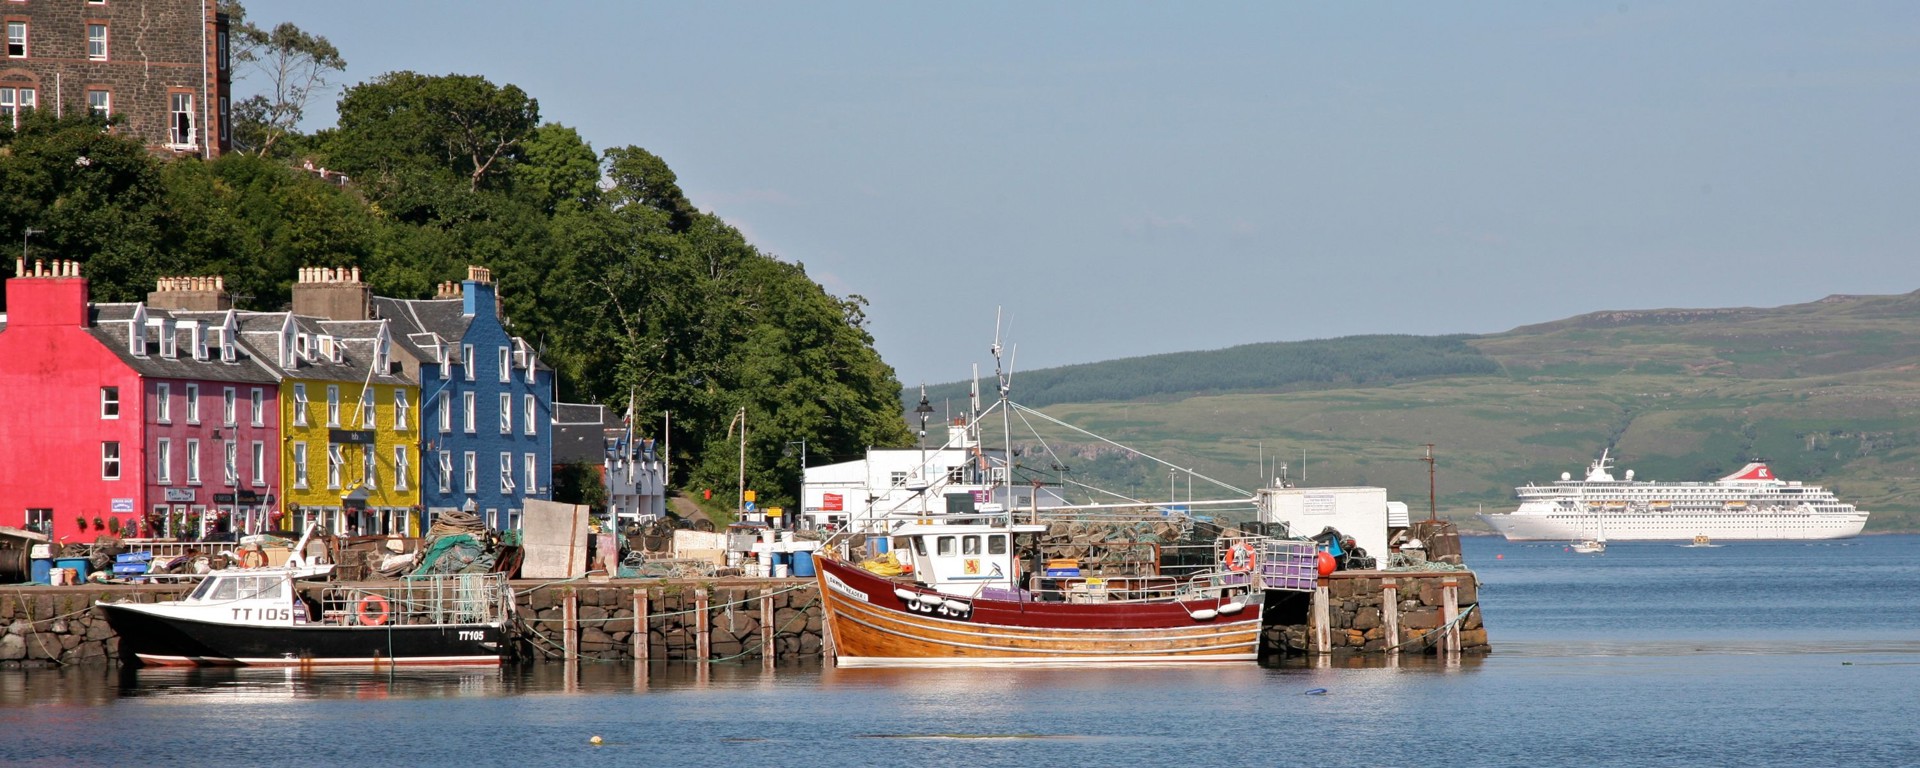 Background image - Tobermory And Cruise Ship Credit Tob Harbour